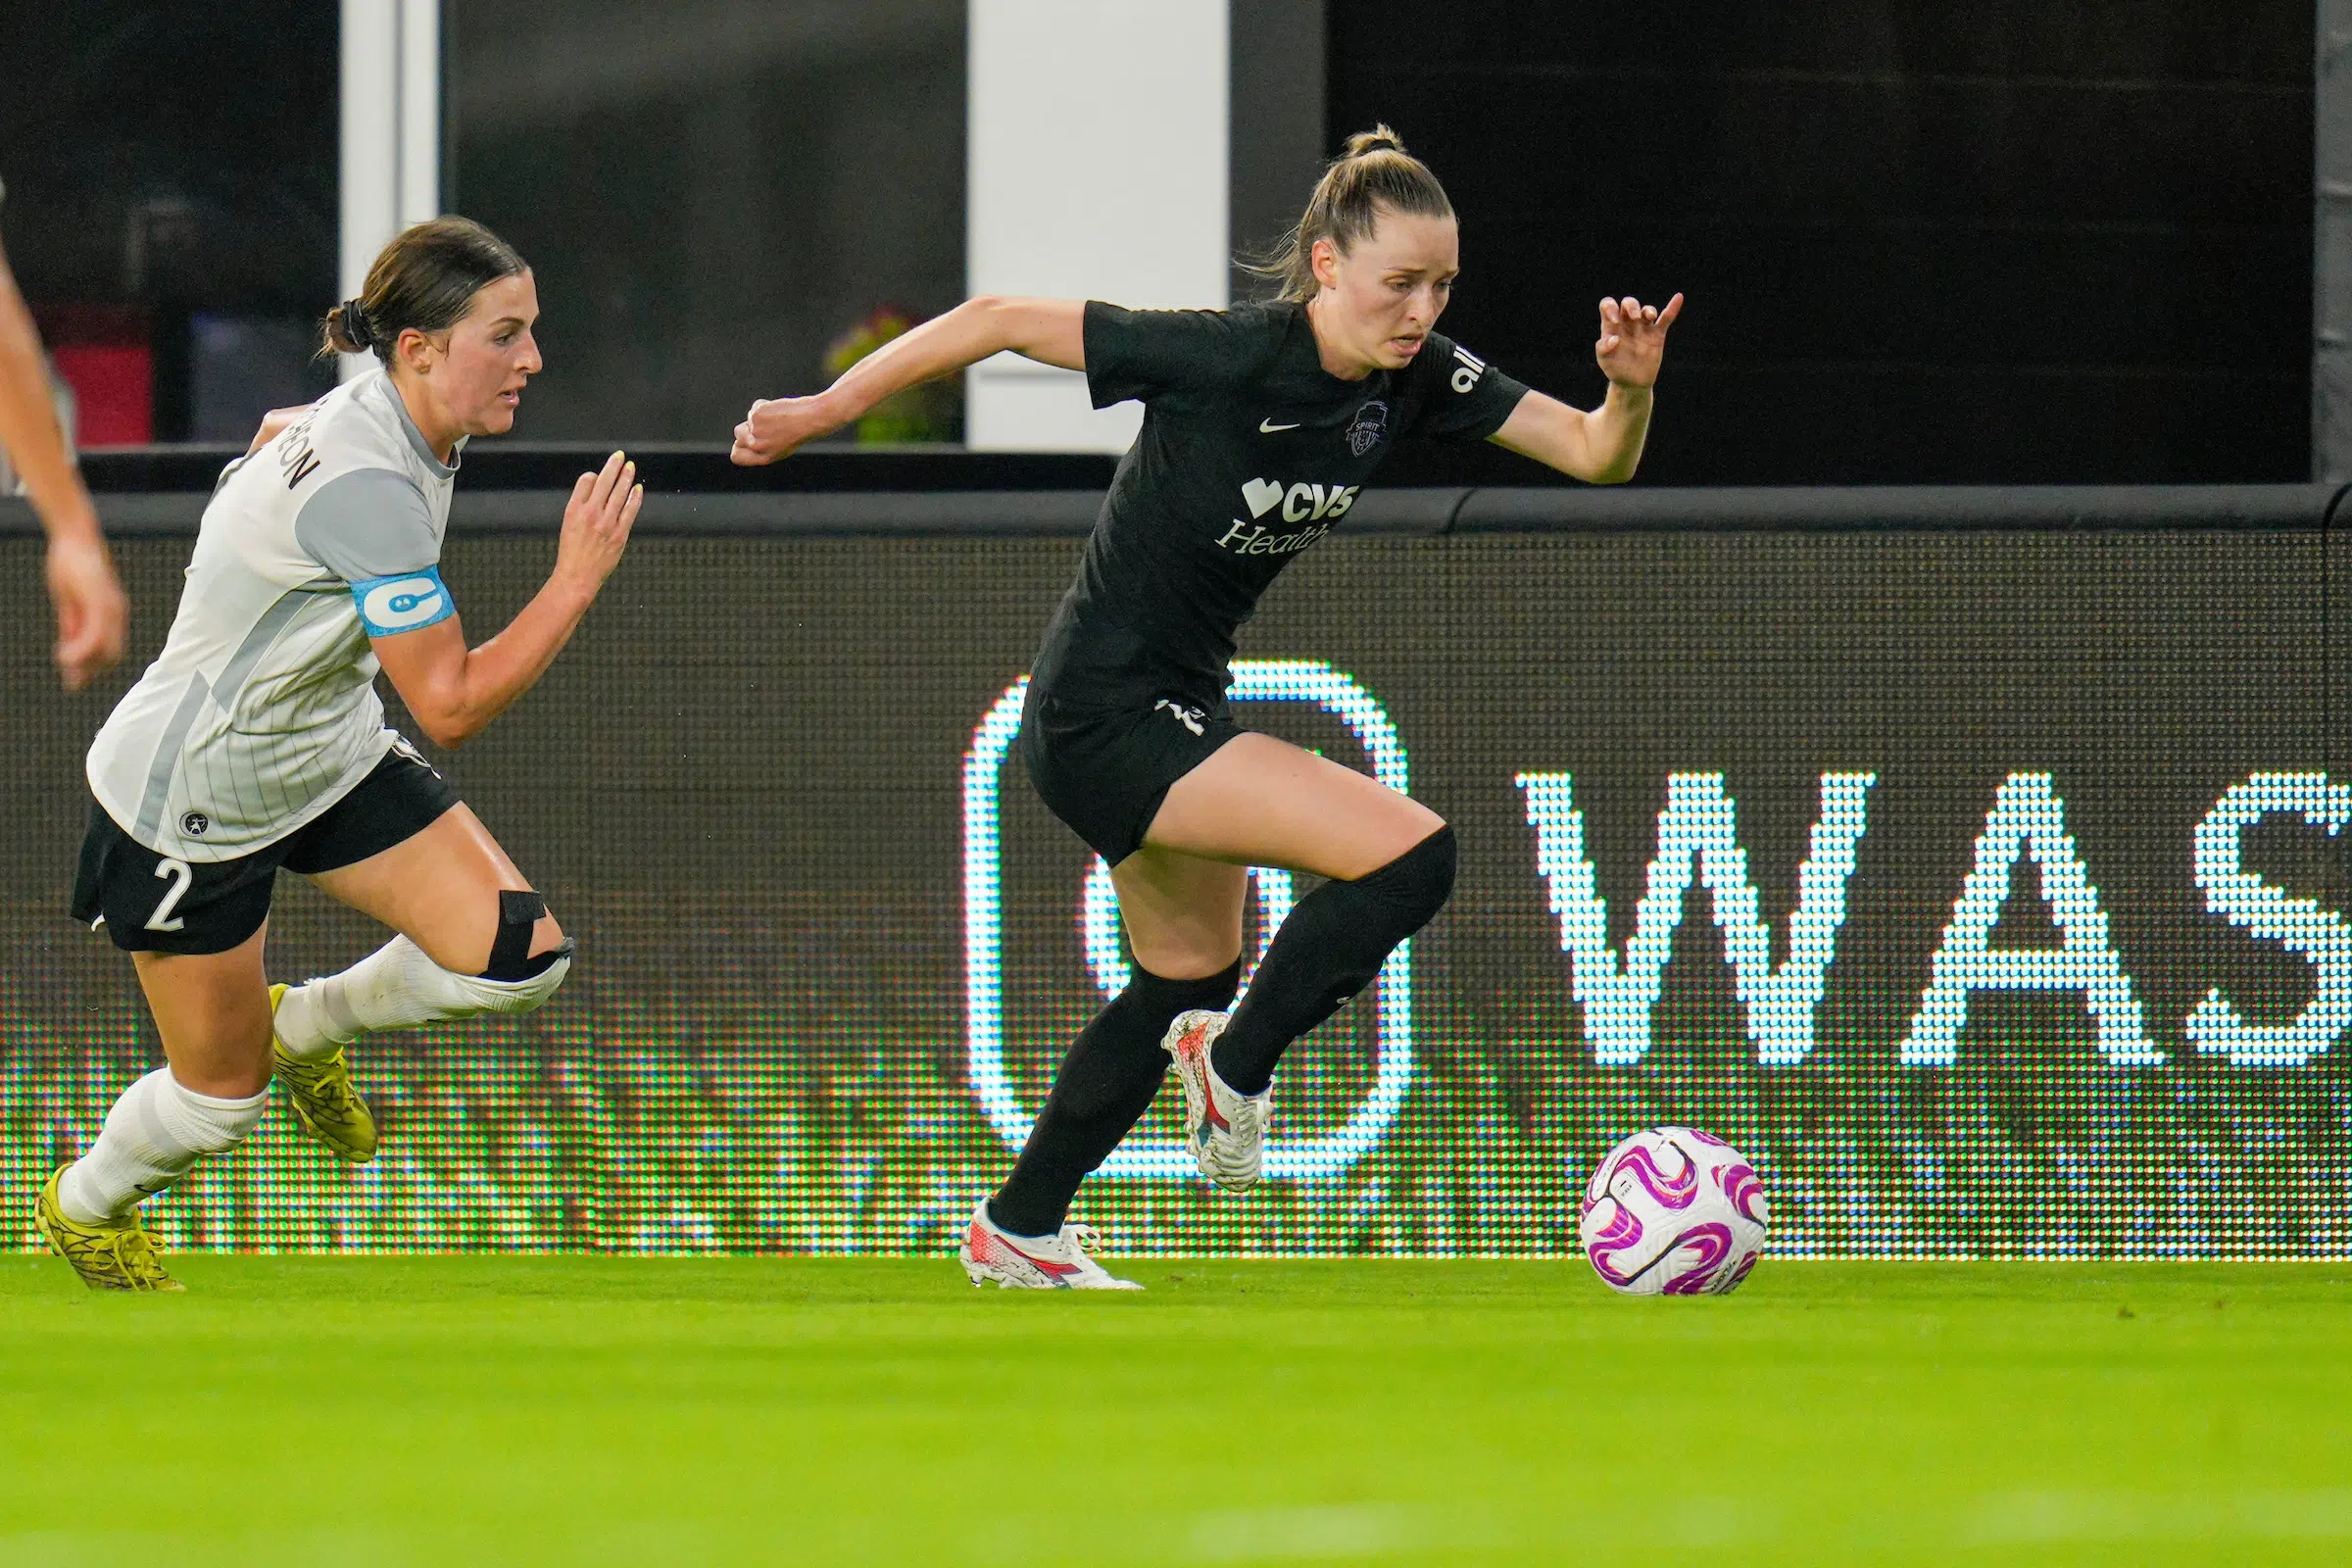 Gabby Carle in a black uniform dribbles a soccer ball passed a defender.